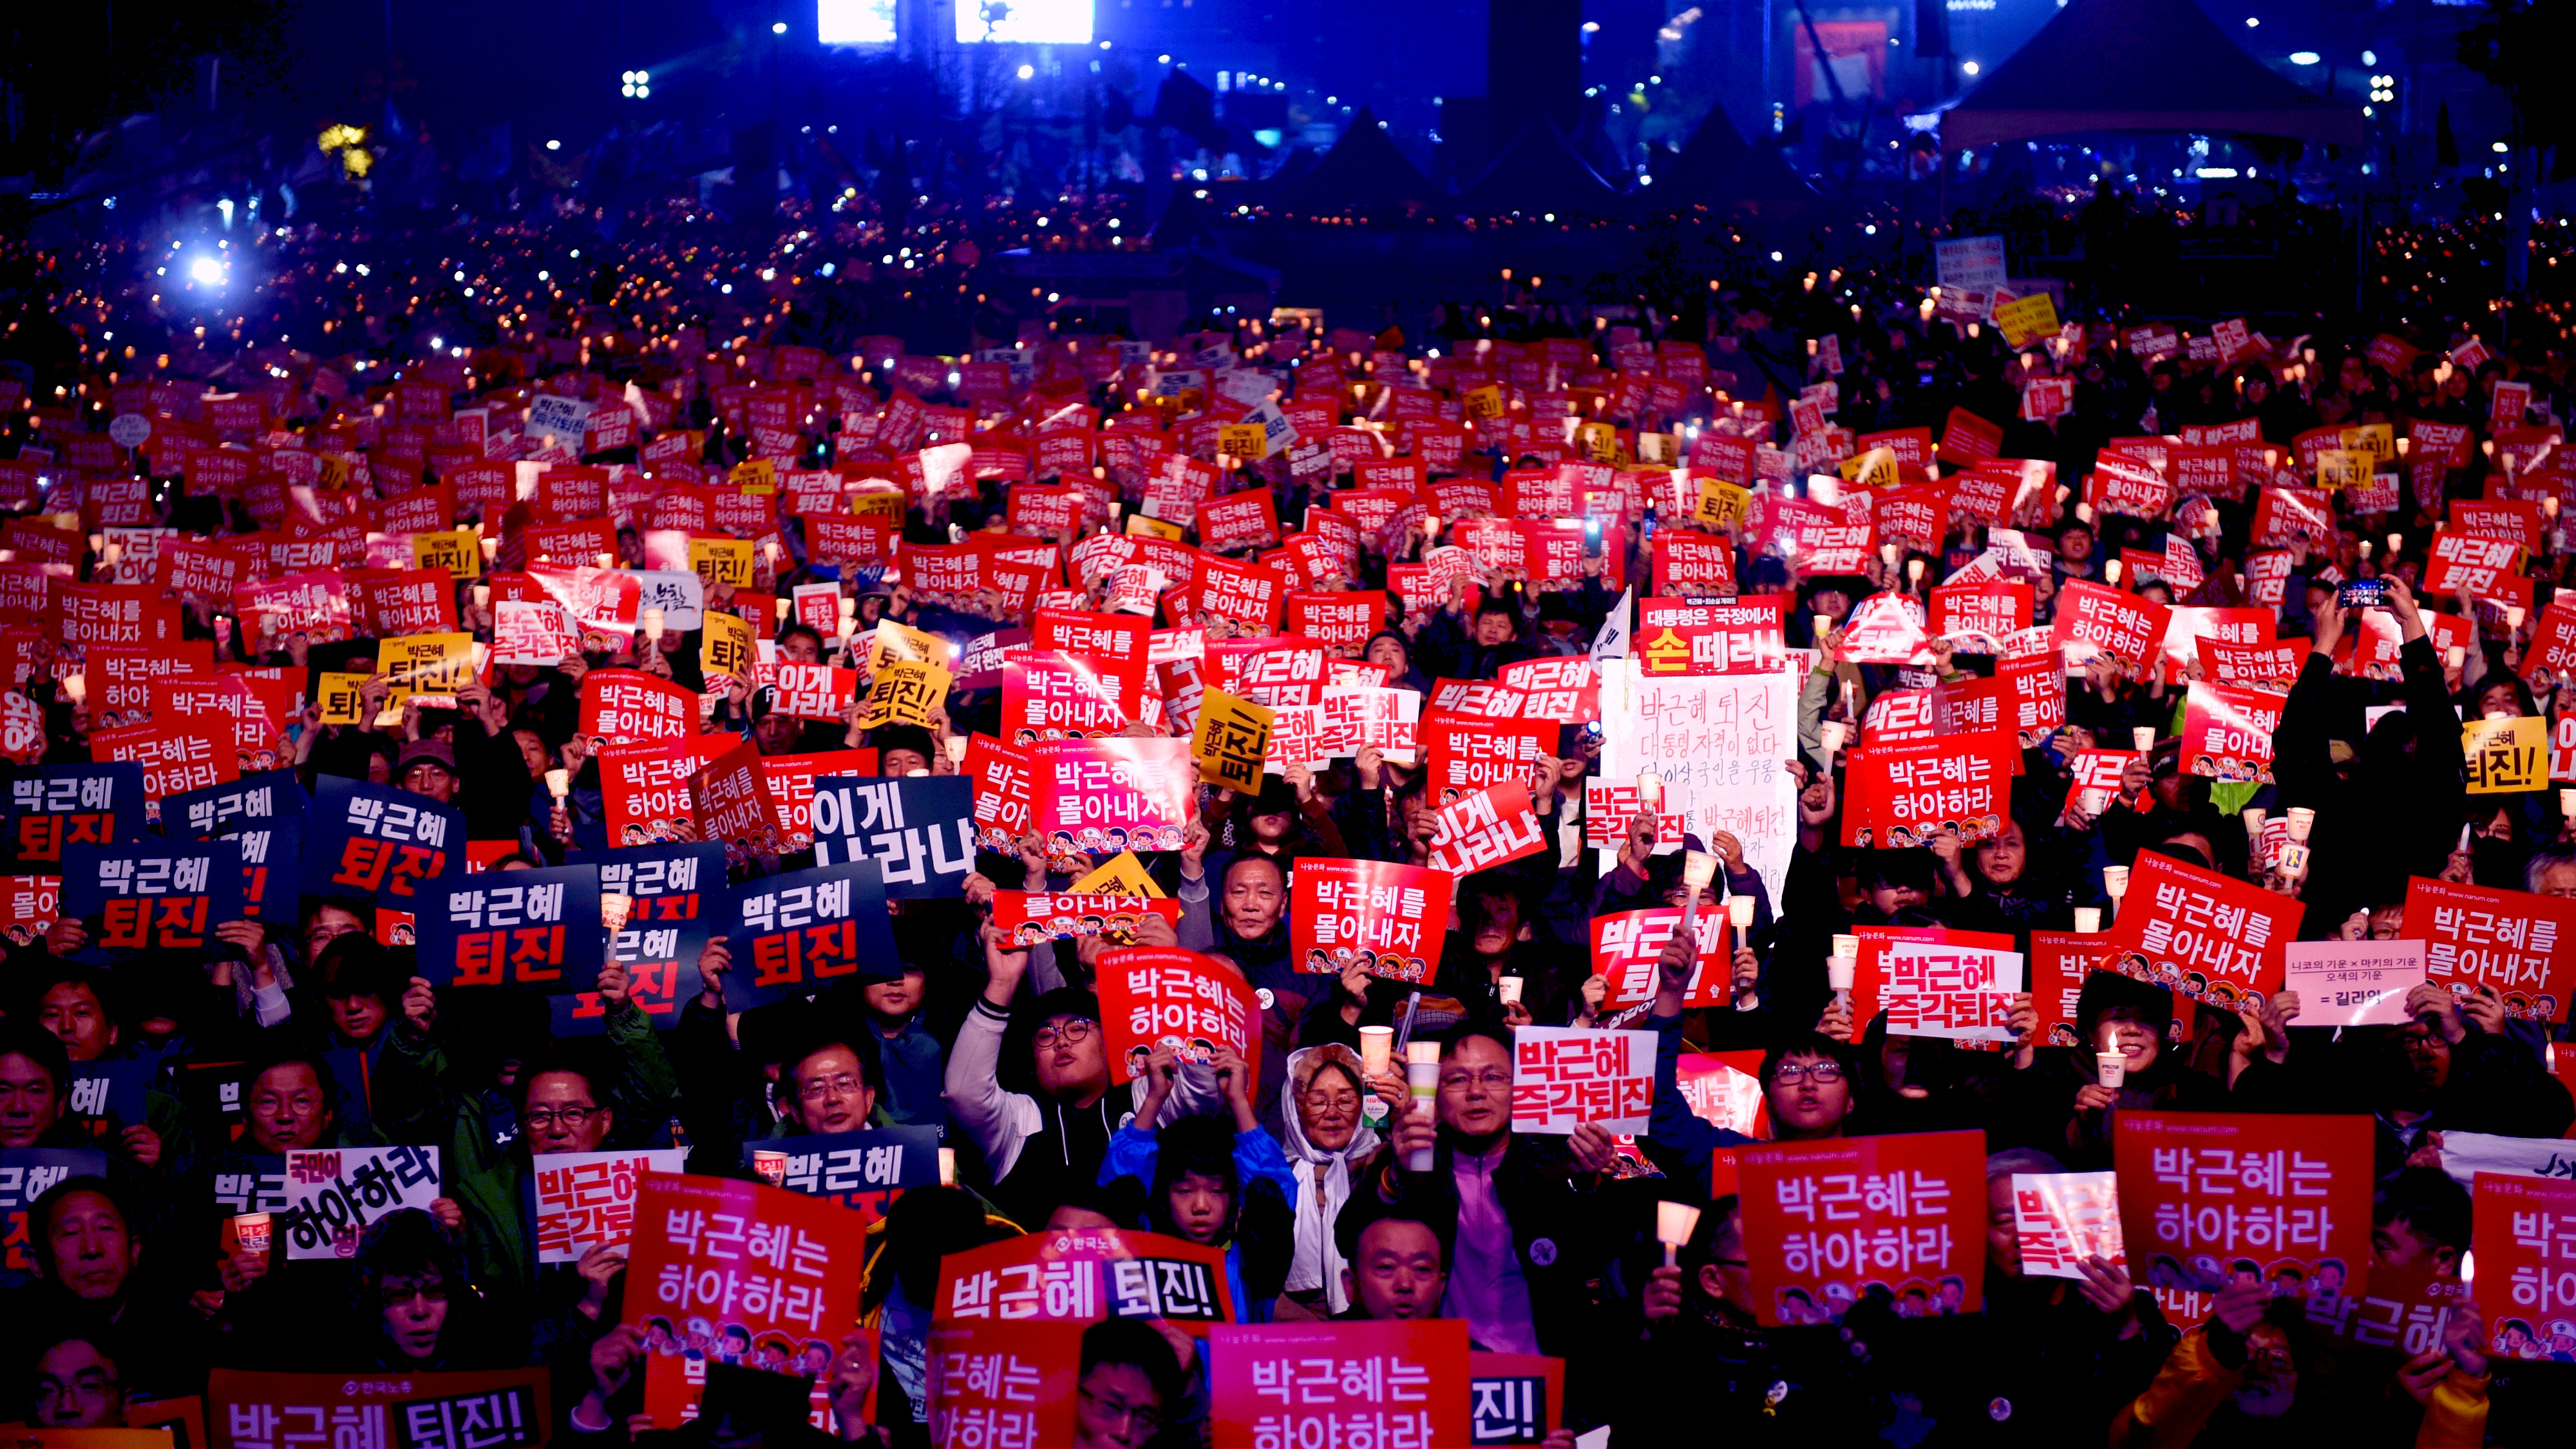 Protesters in Seoul hold a rally calling for the resignation of President Park Geun-Hye